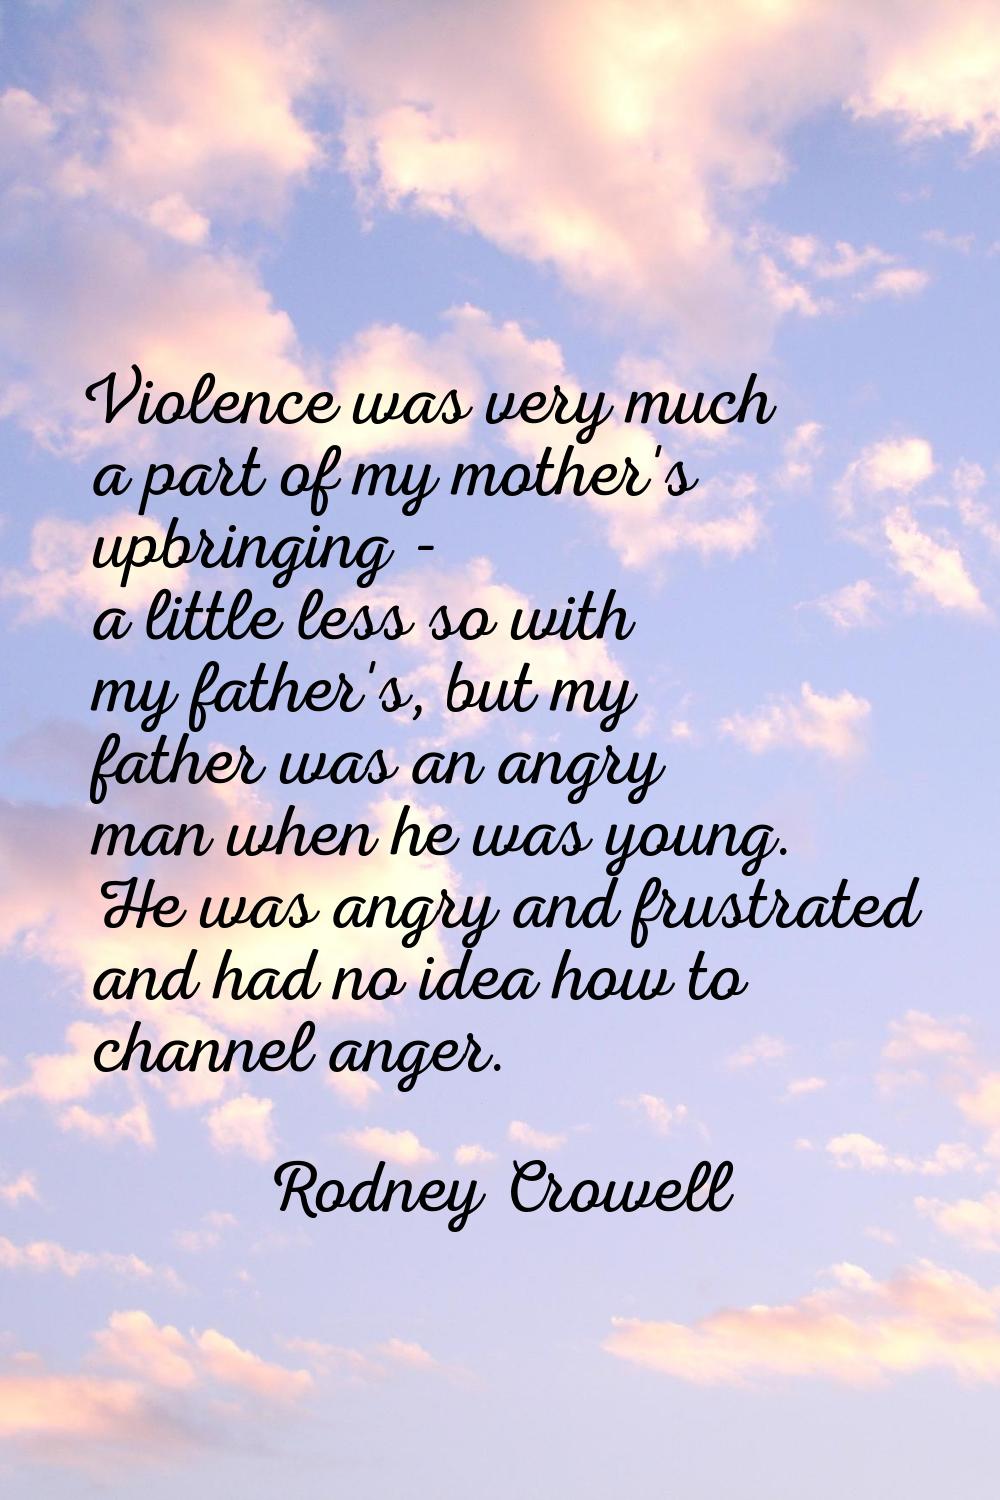 Violence was very much a part of my mother's upbringing - a little less so with my father's, but my